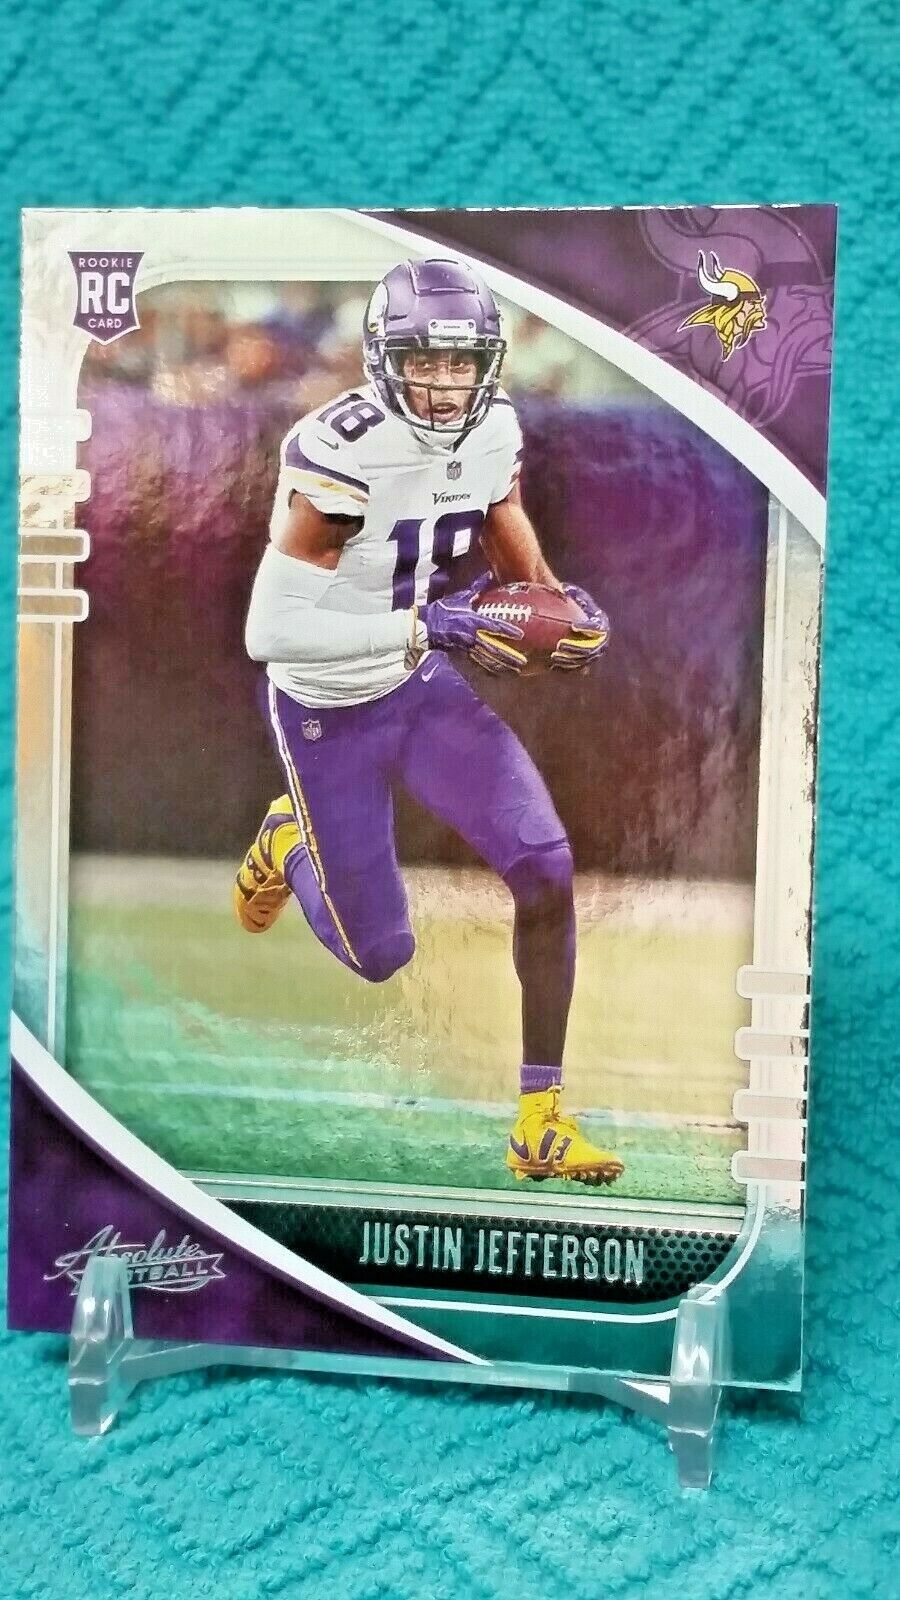 2020 Absolute Justin Jefferson Rc Rookie Card Baltimore Ravens. rookie card picture